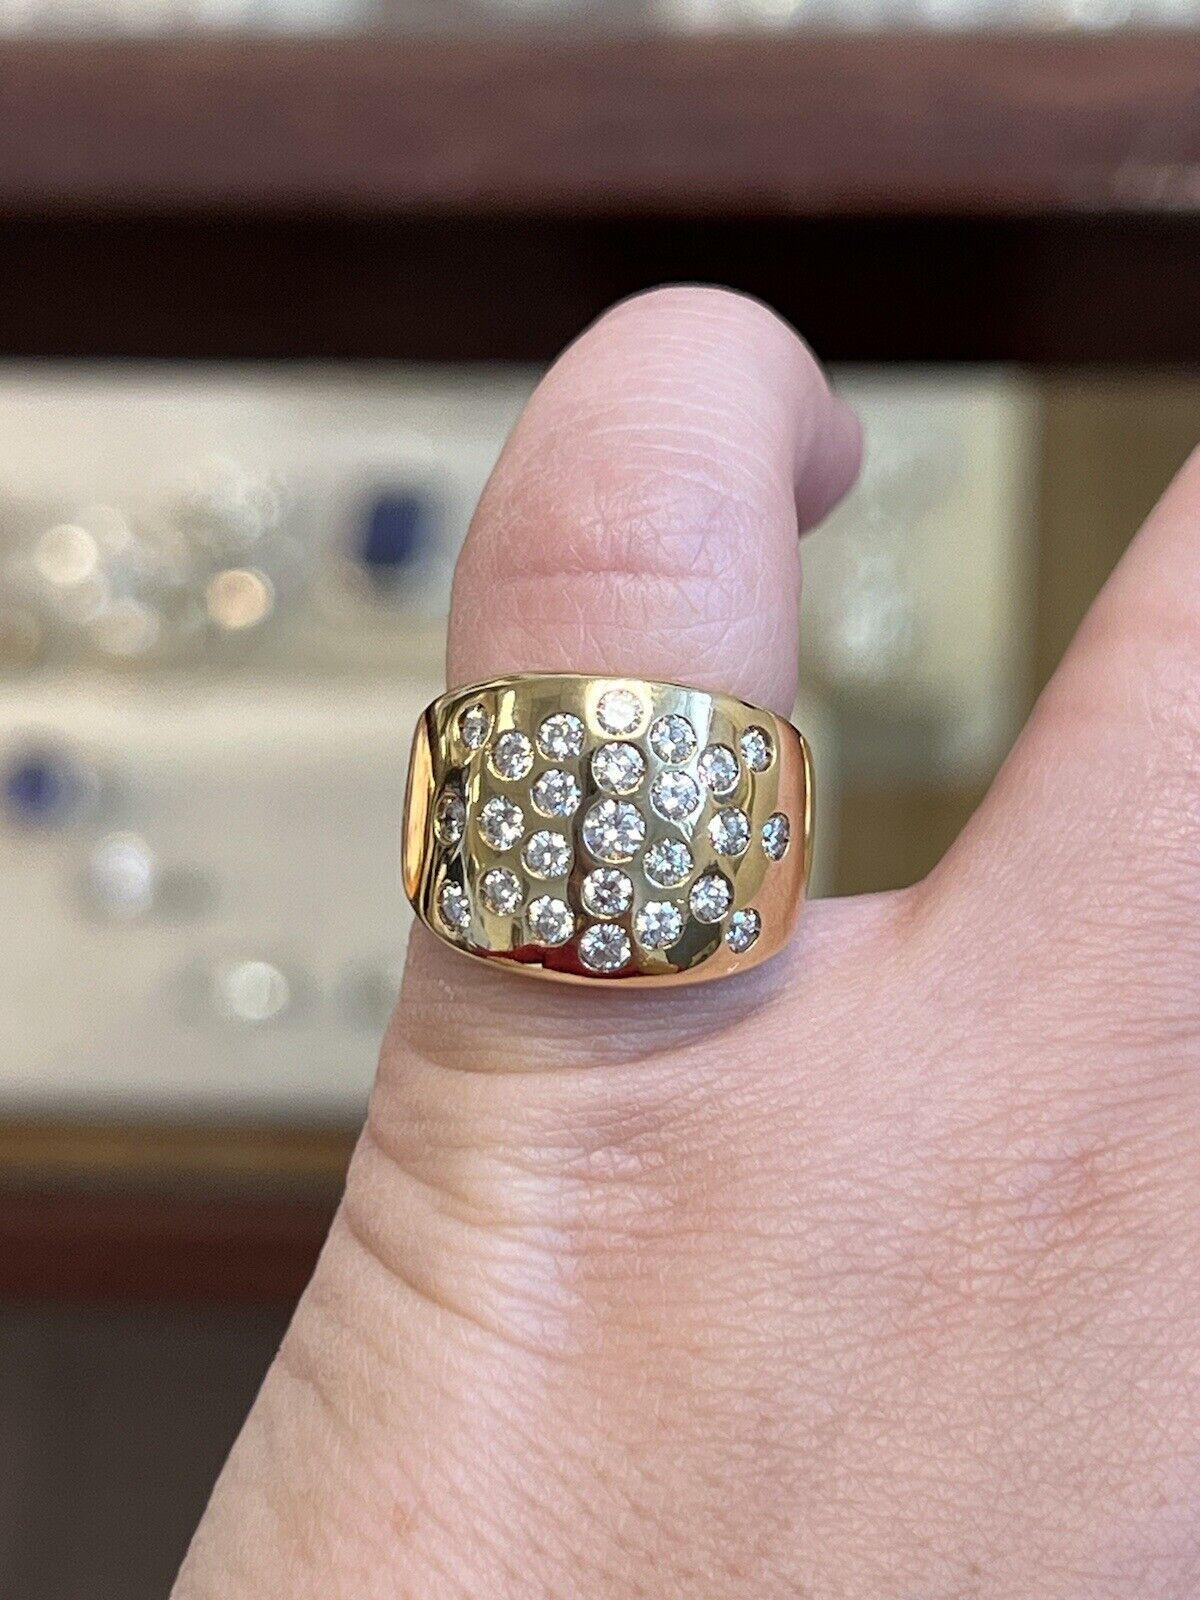 HERMES PARIS 18k Yellow Gold & Diamond Cigar Band Ring Vintage Circa 1980s In Excellent Condition For Sale In Beverly Hills, CA